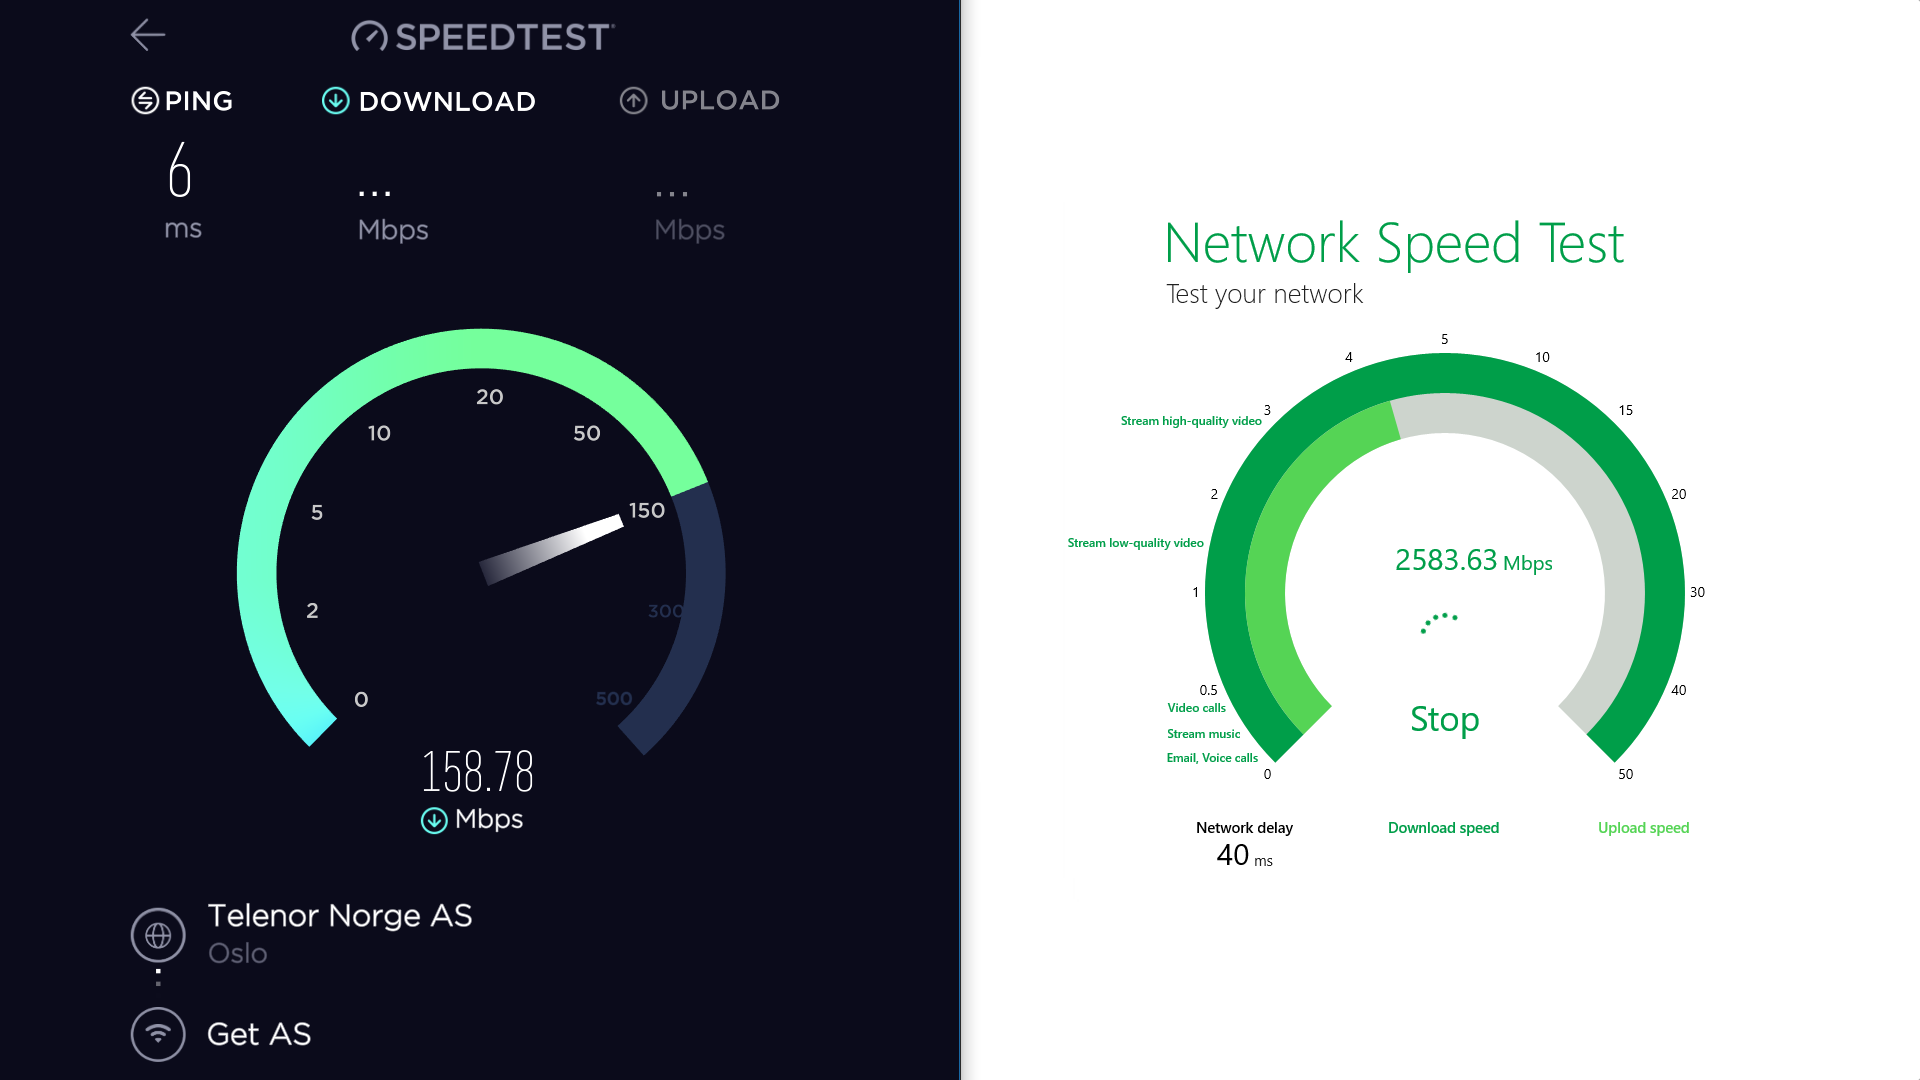 Windows network speed testing apps compared: Ookla or Microsoft?